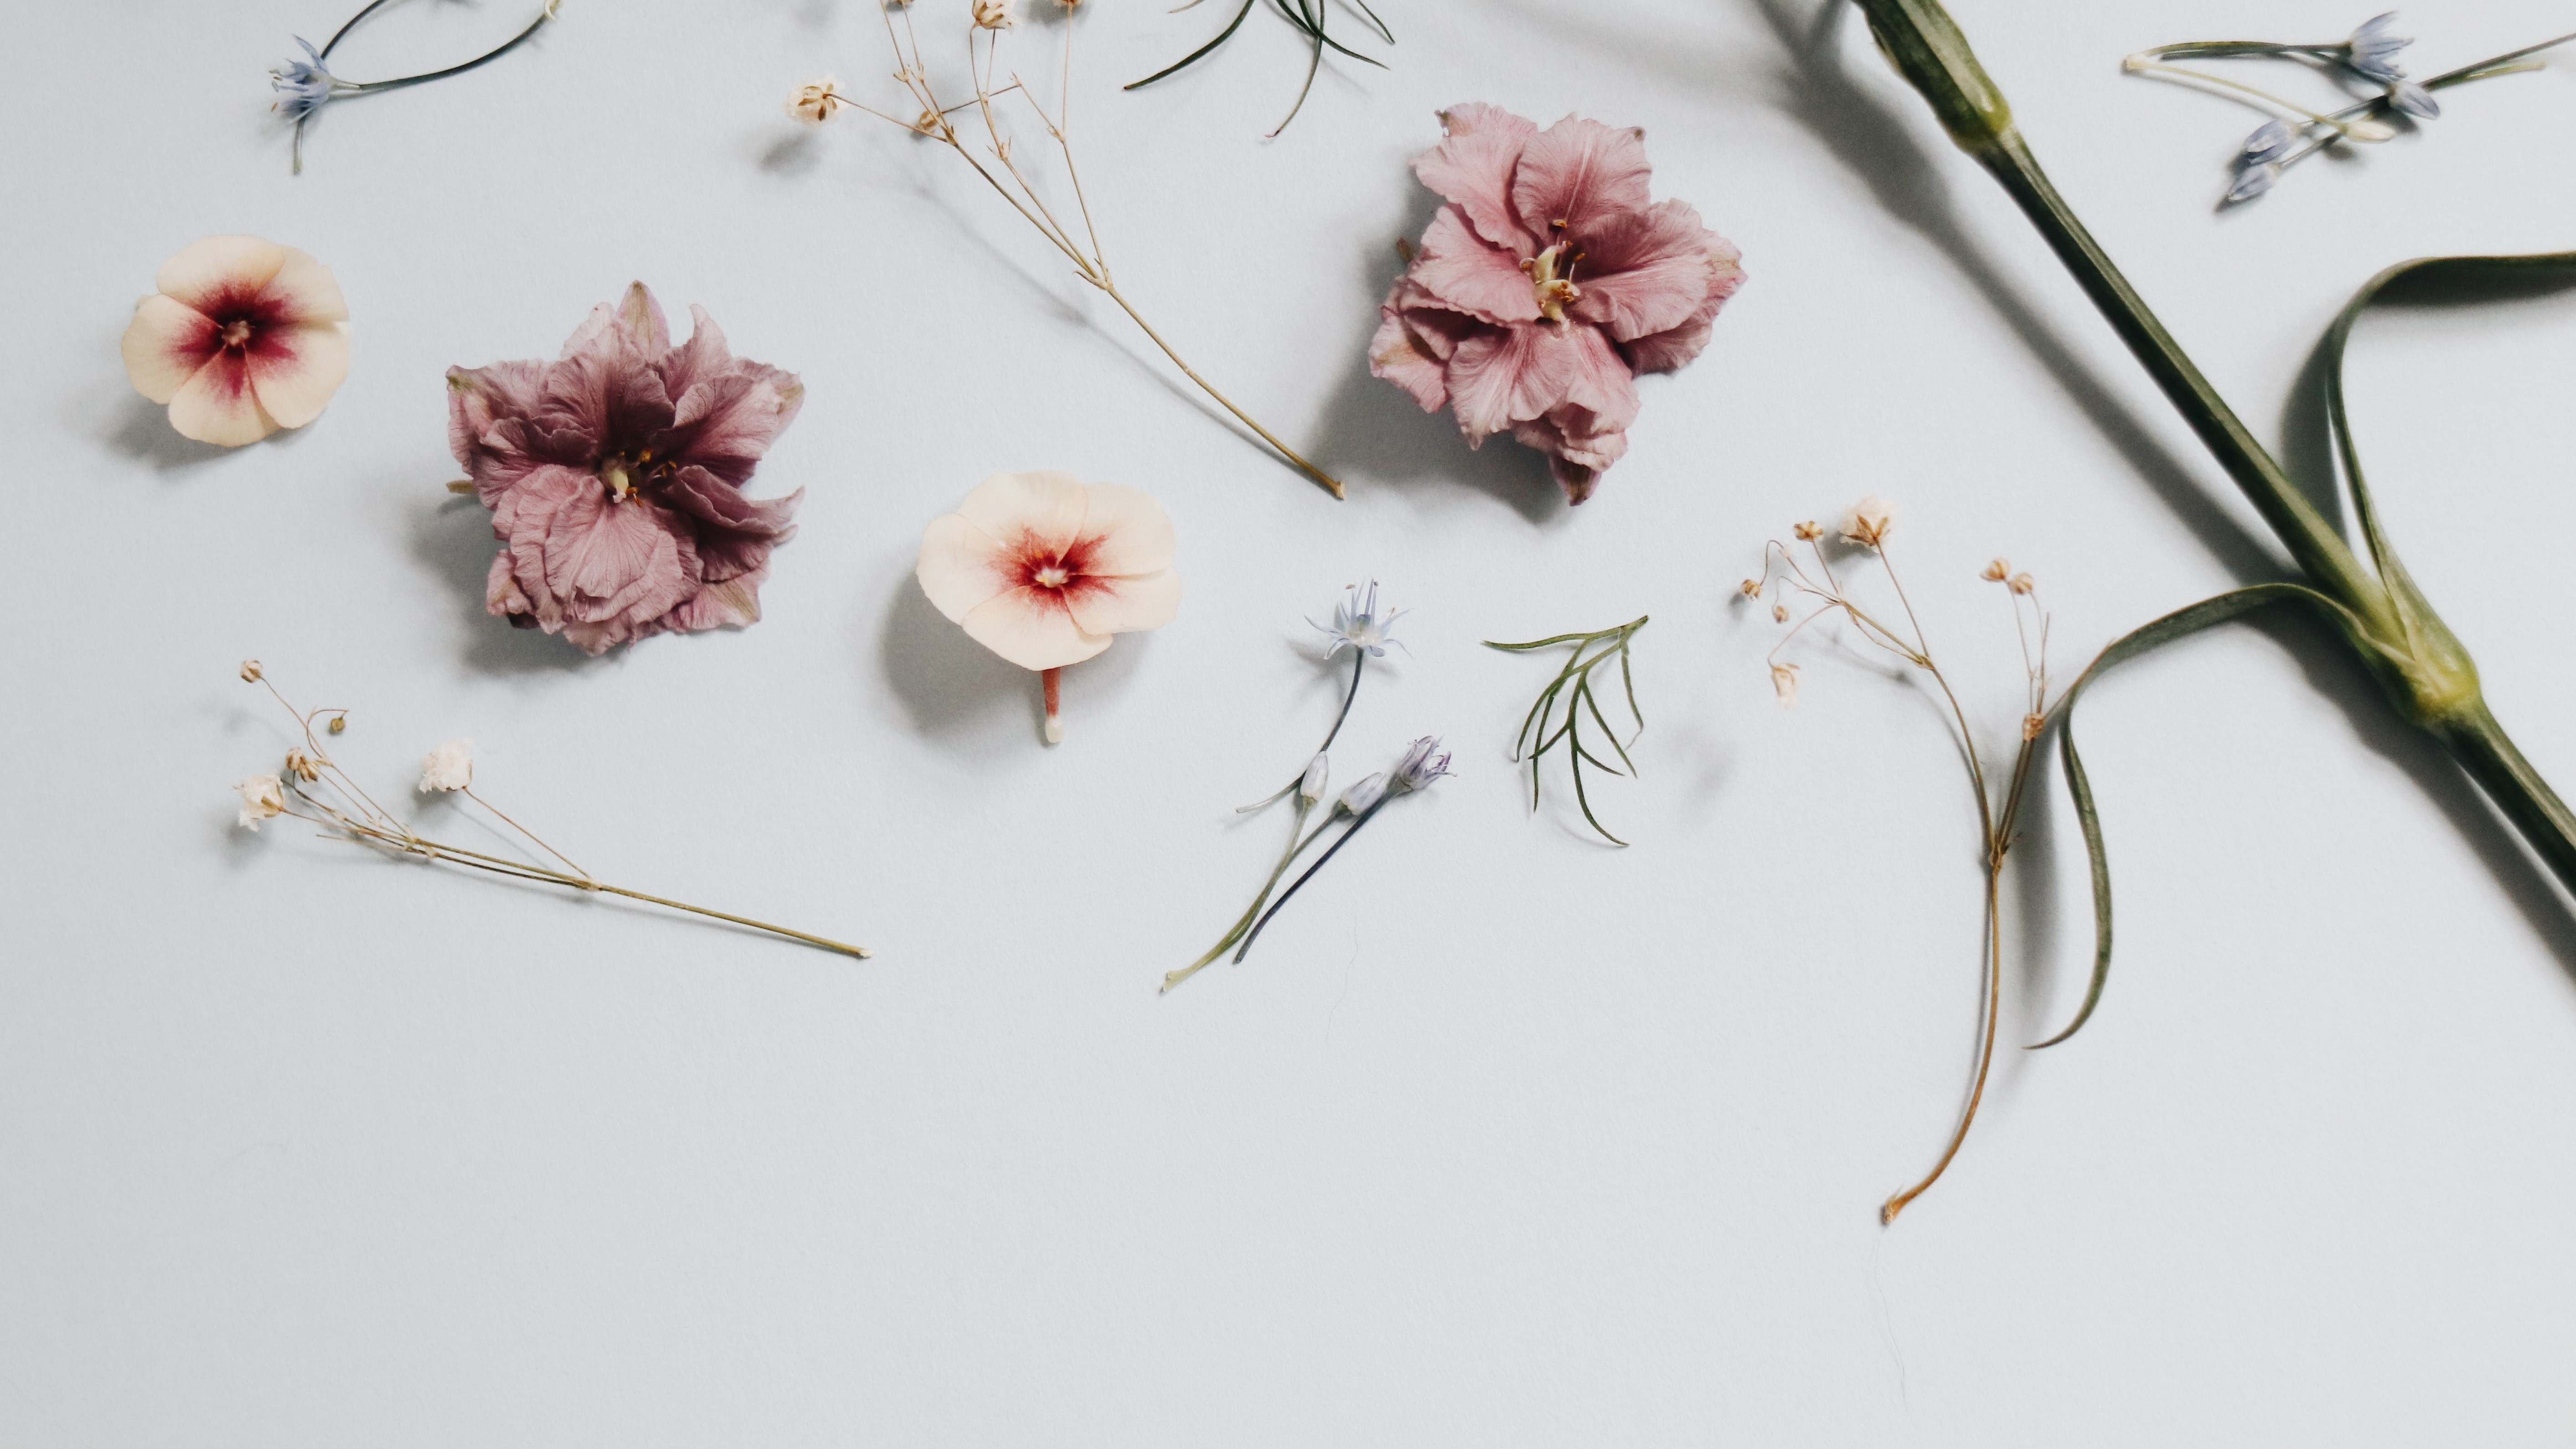 Dried flowers scattered on a white surface